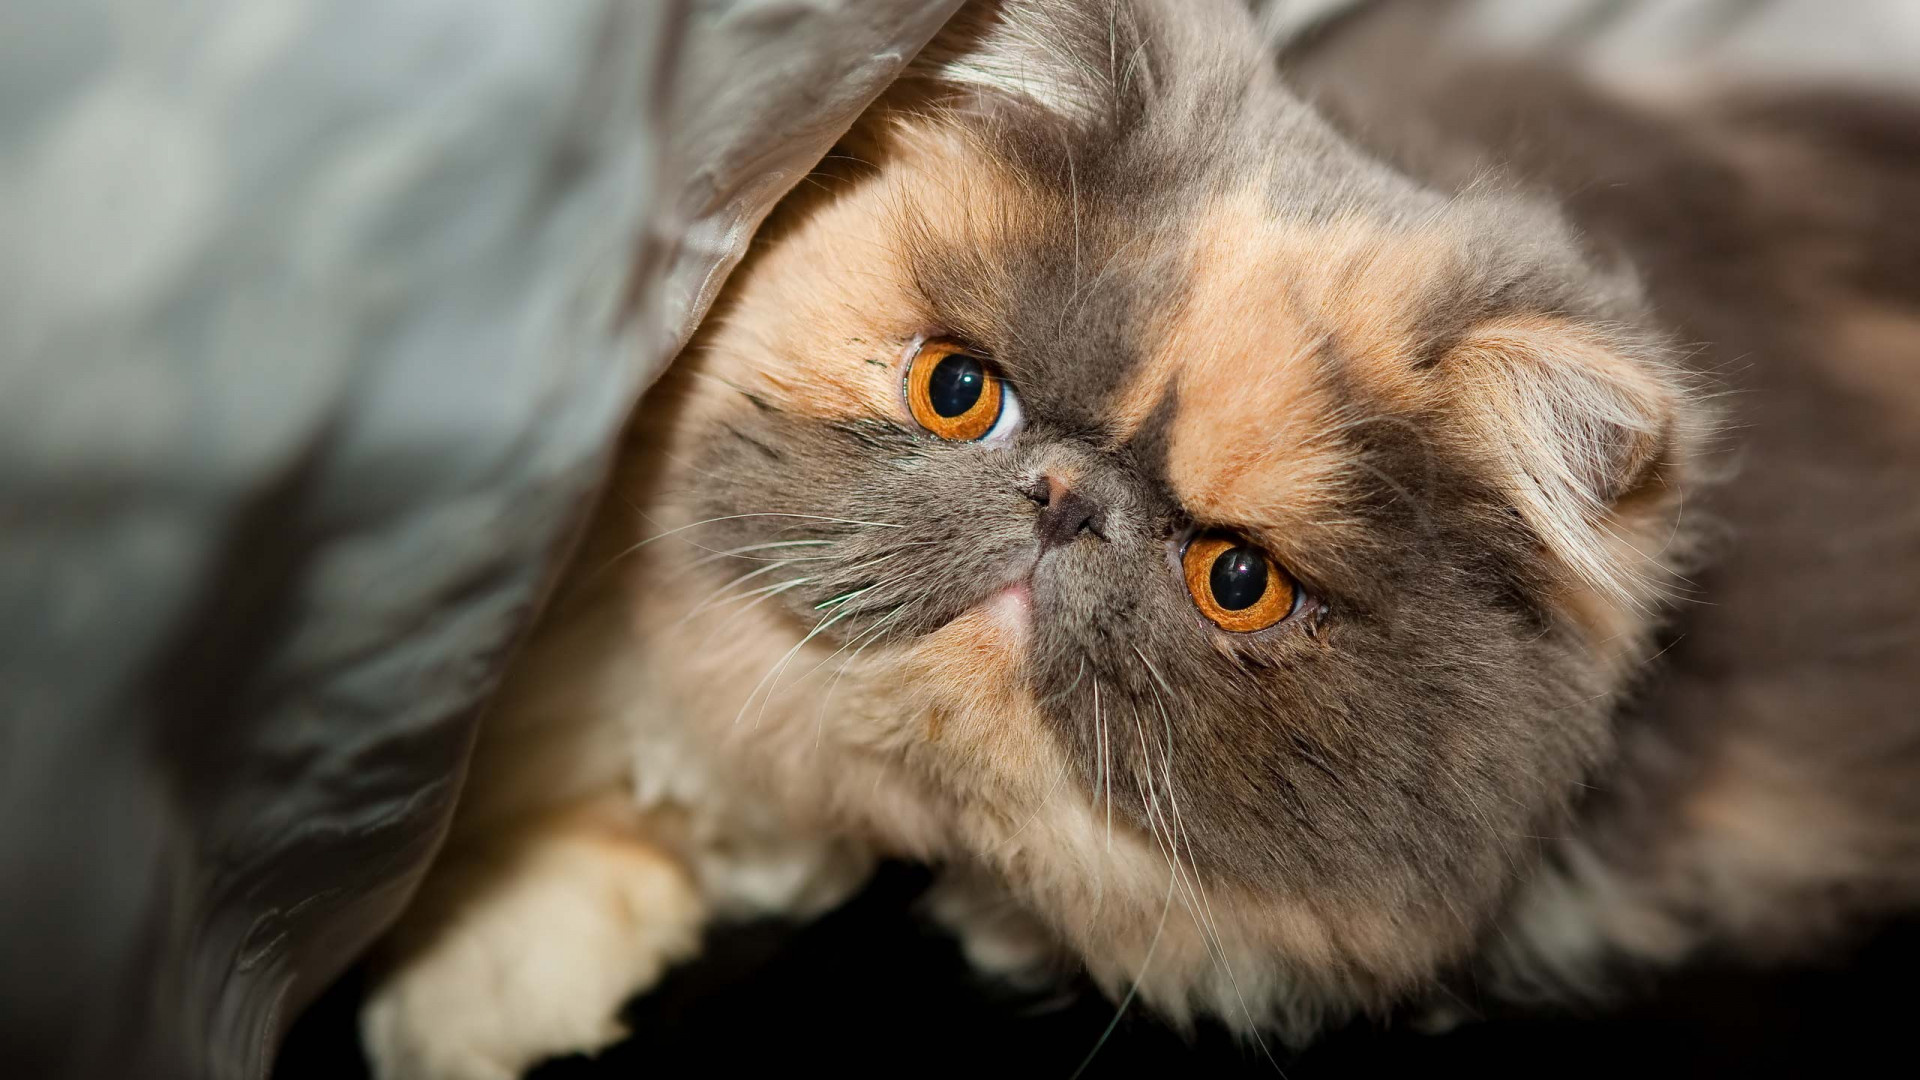 Exotic Shorthair Cat: Their coat is short, yet slightly longer than lengths generally seen in other shorthaired cats. 1920x1080 Full HD Background.